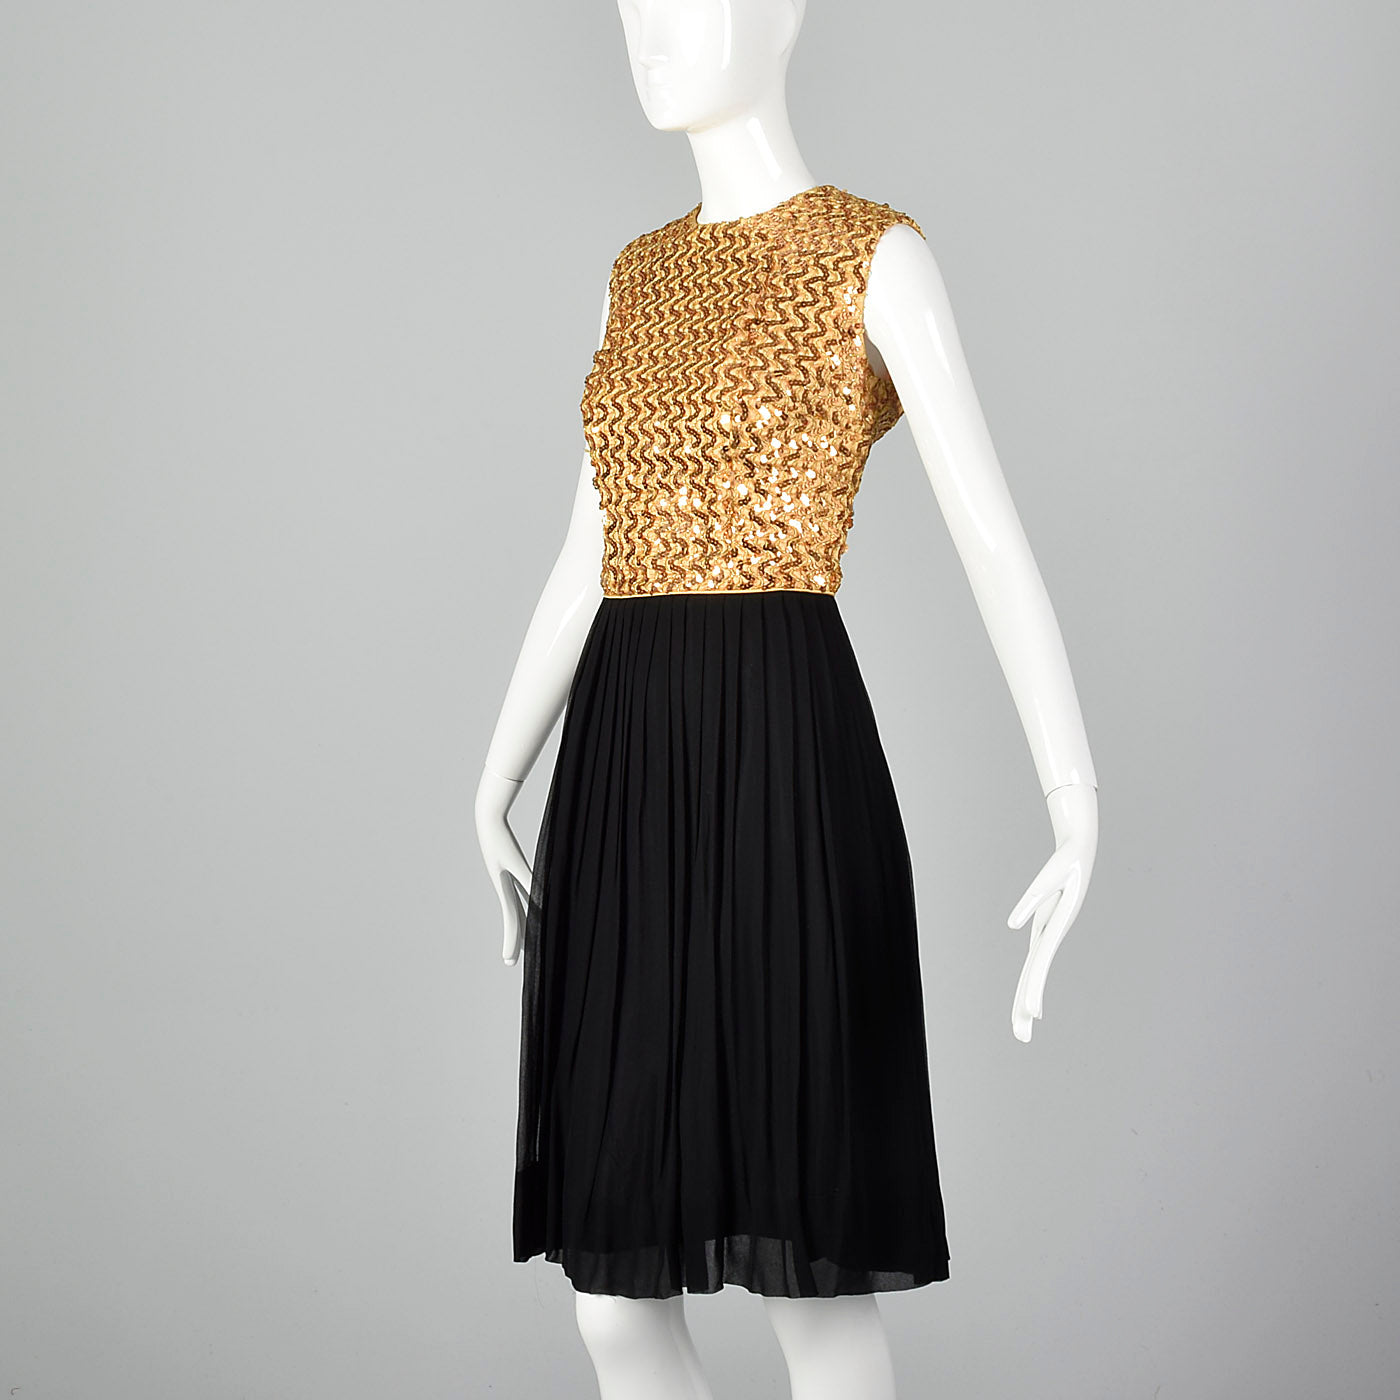 1960s Party Dress with Gold Sequin Bodice